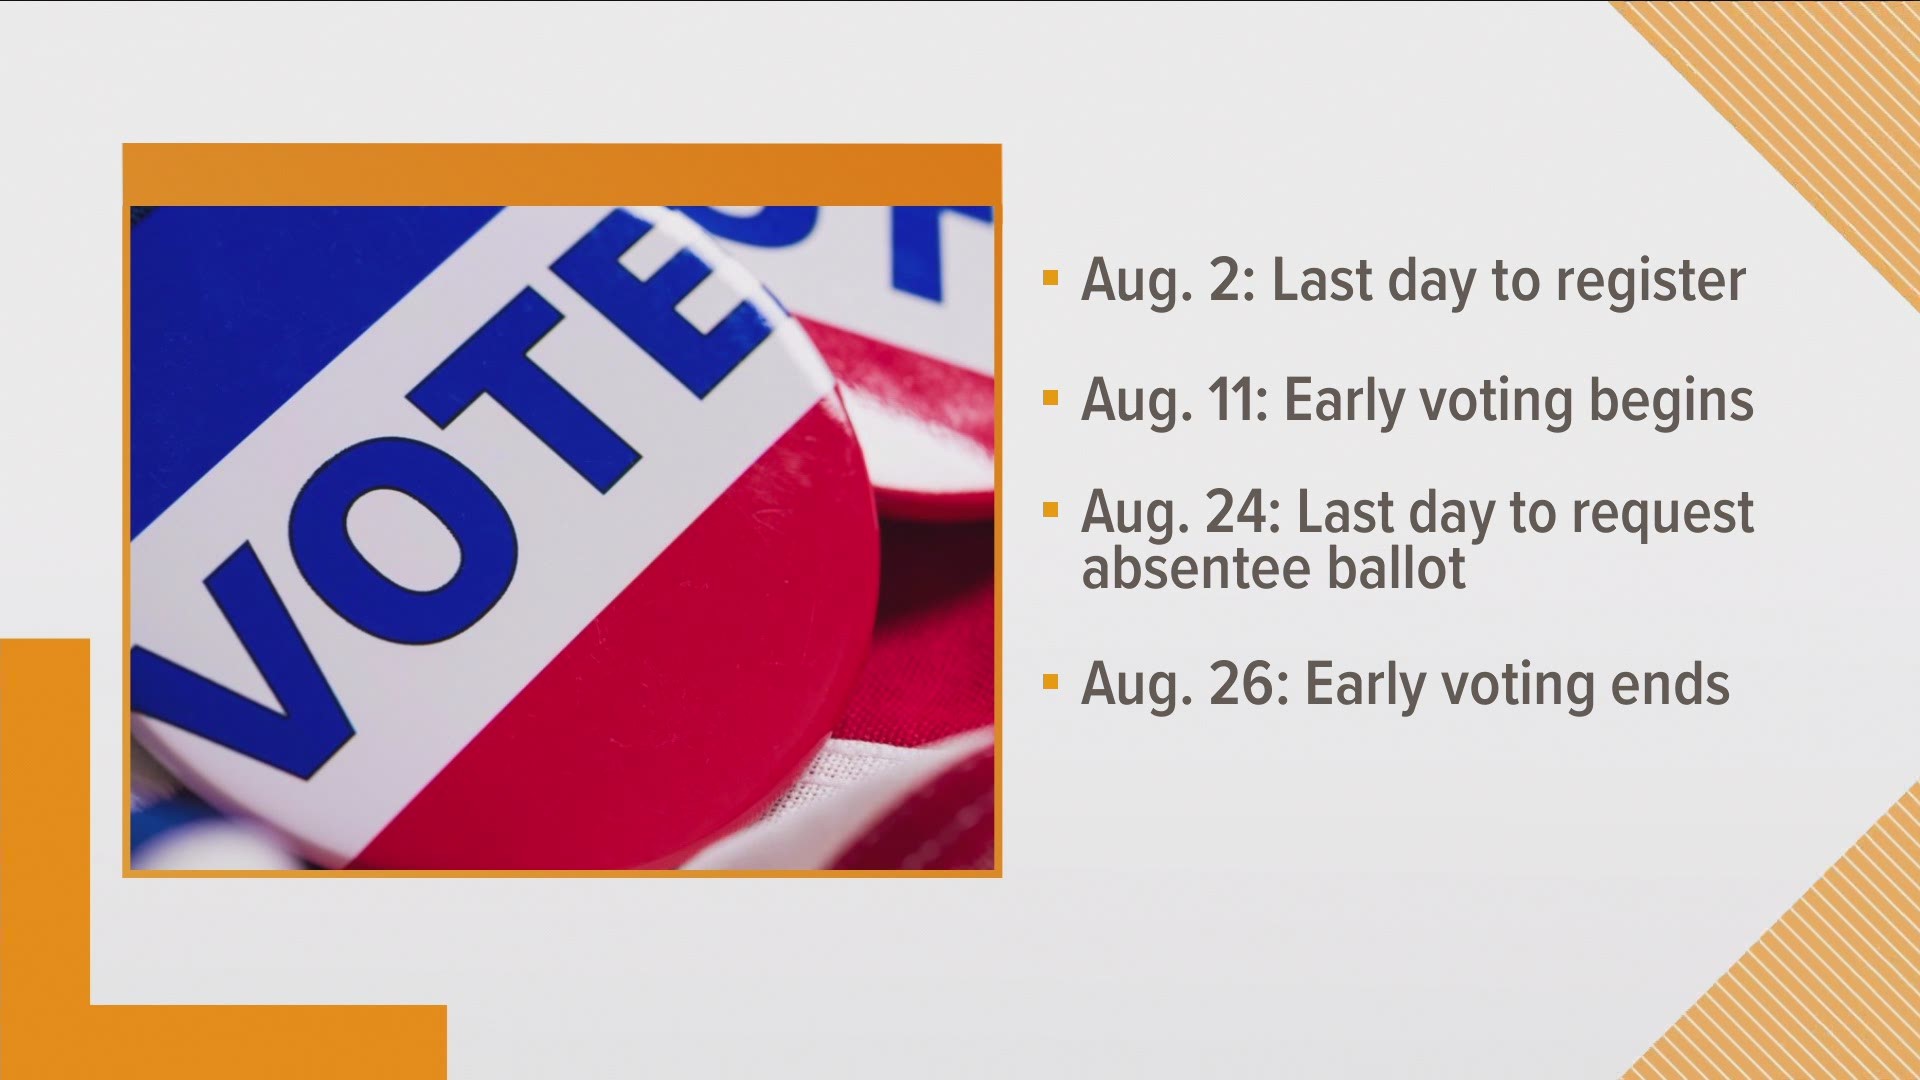 Here are some dates you need to know leading up to the primary election.